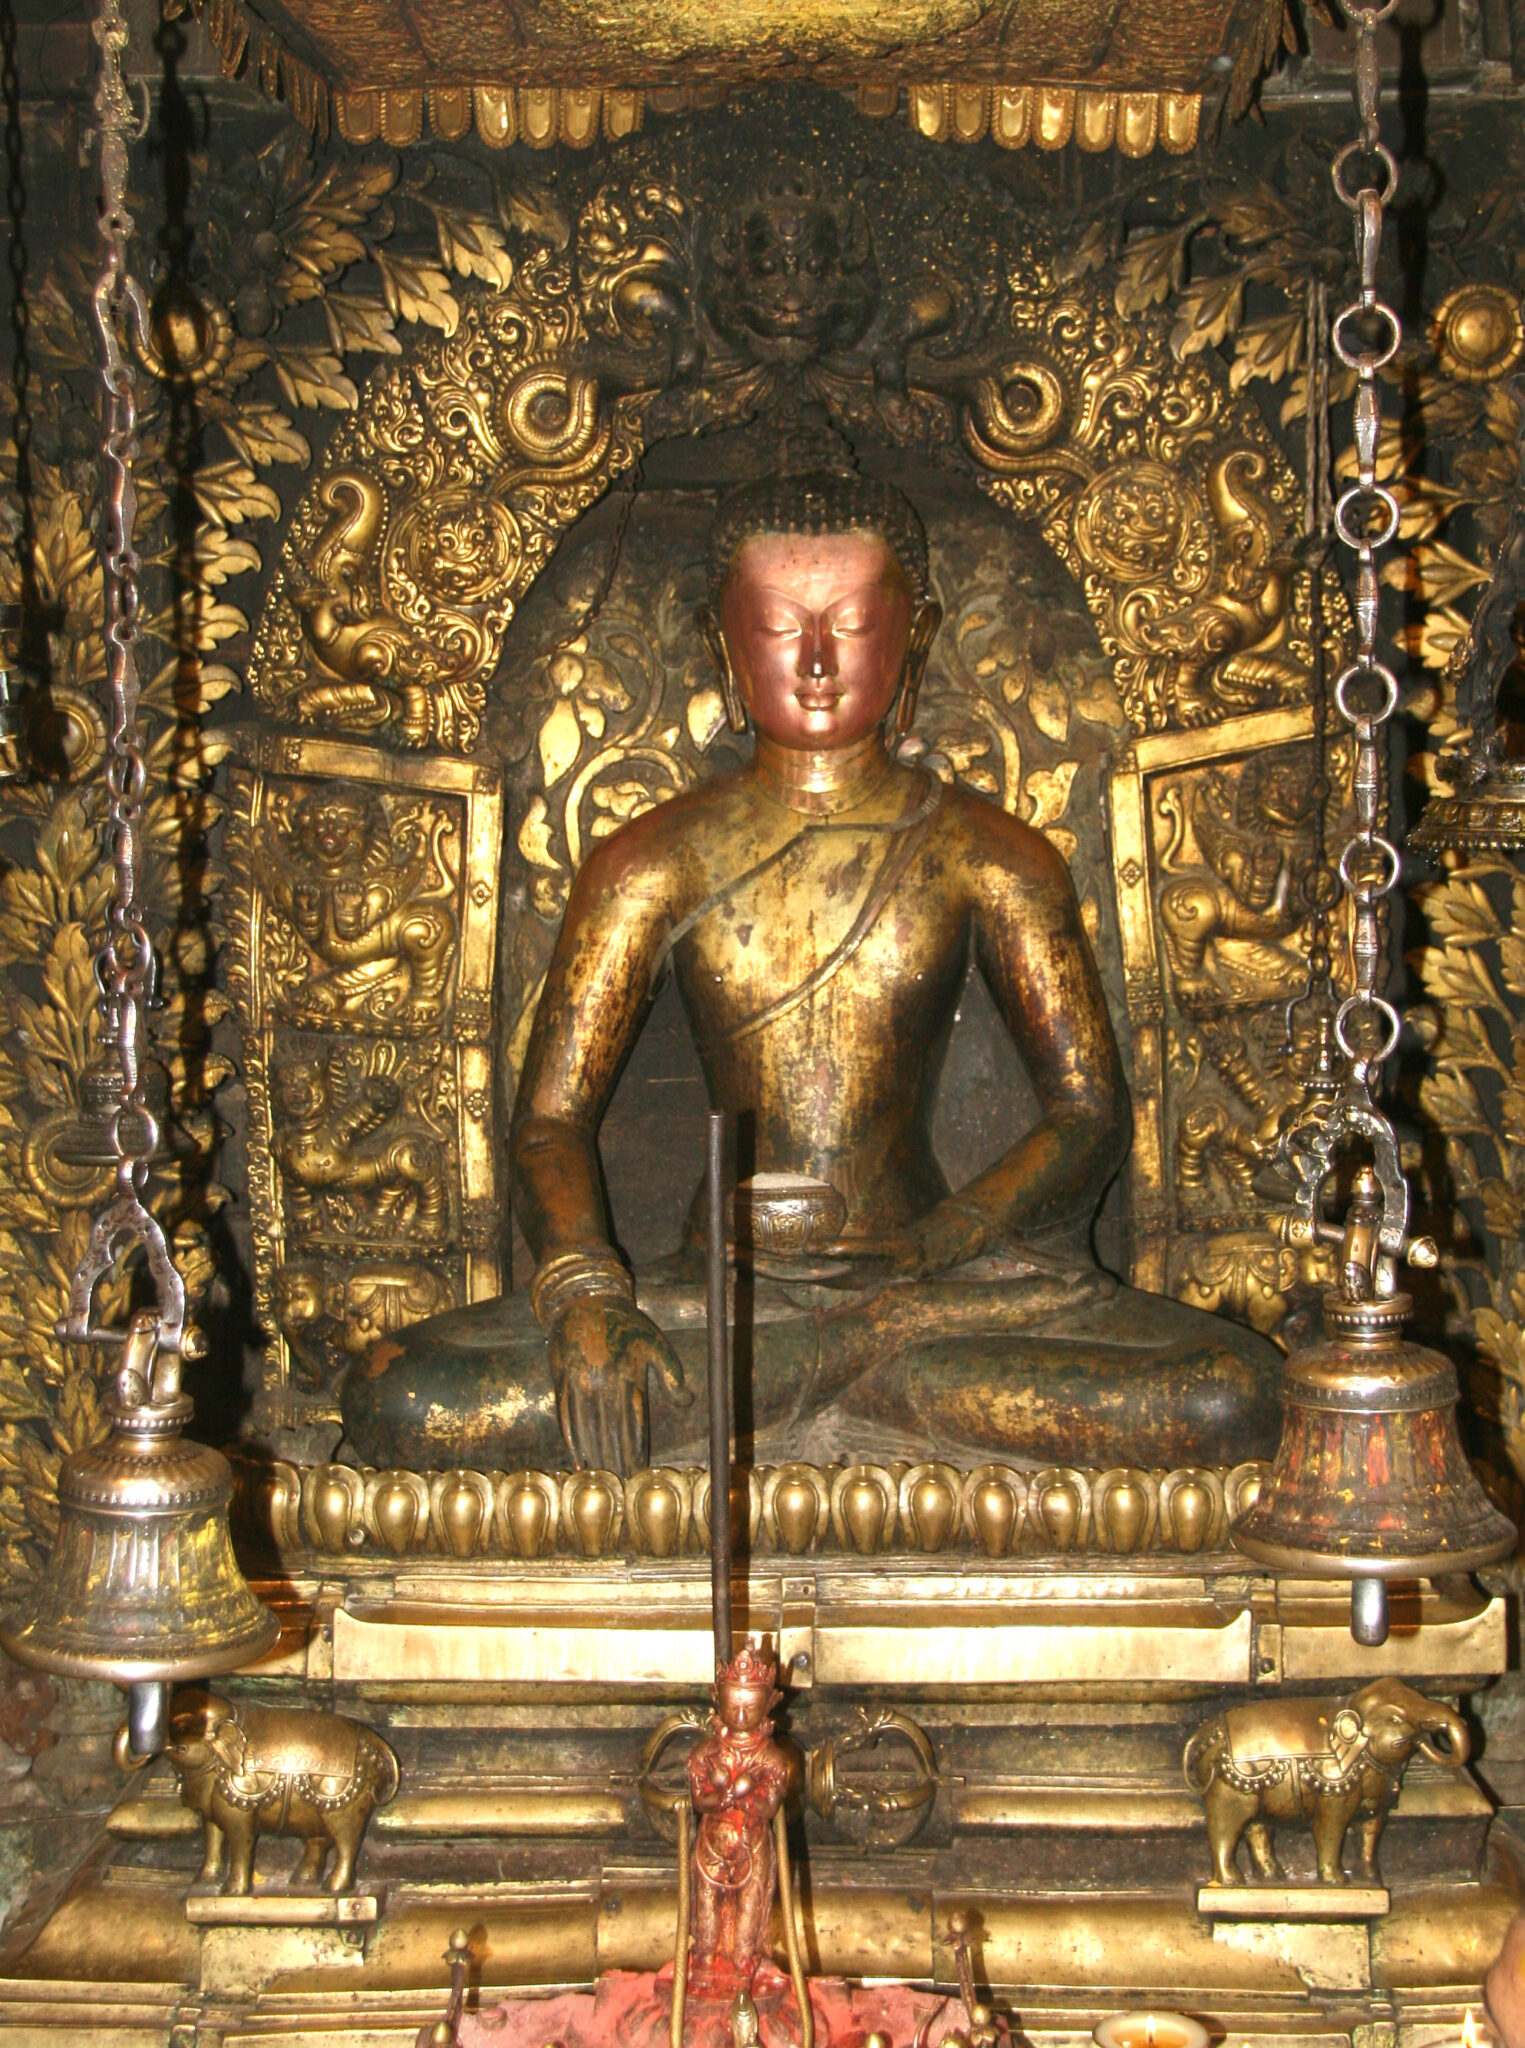 Statue of enthroned golden Buddha pictured without adornments; seated amid profusion of golden decoration and bells suspended on chains